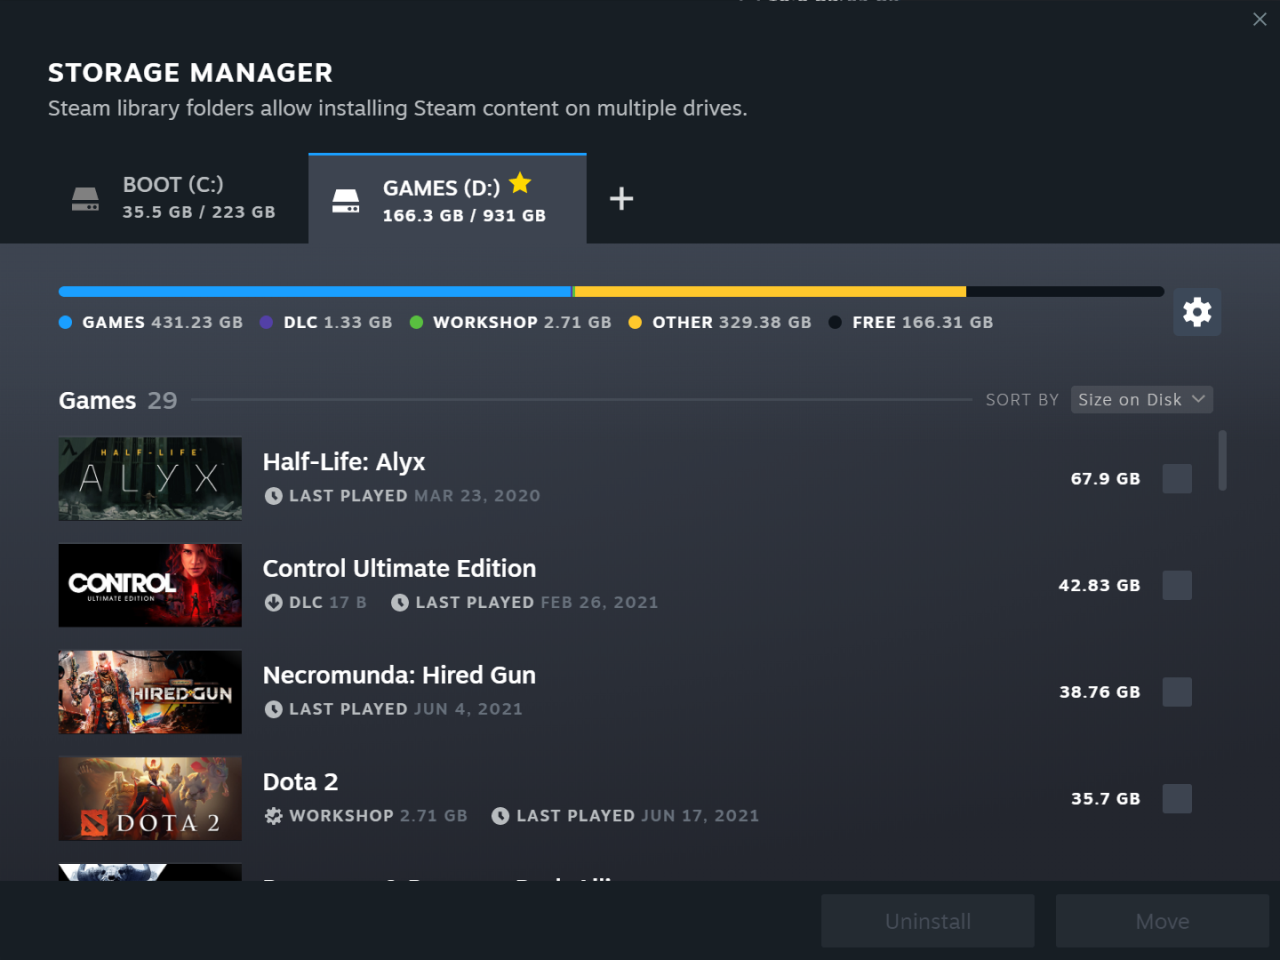 Steam Gives Storage Manager and Download Page a Much-Needed Refresh